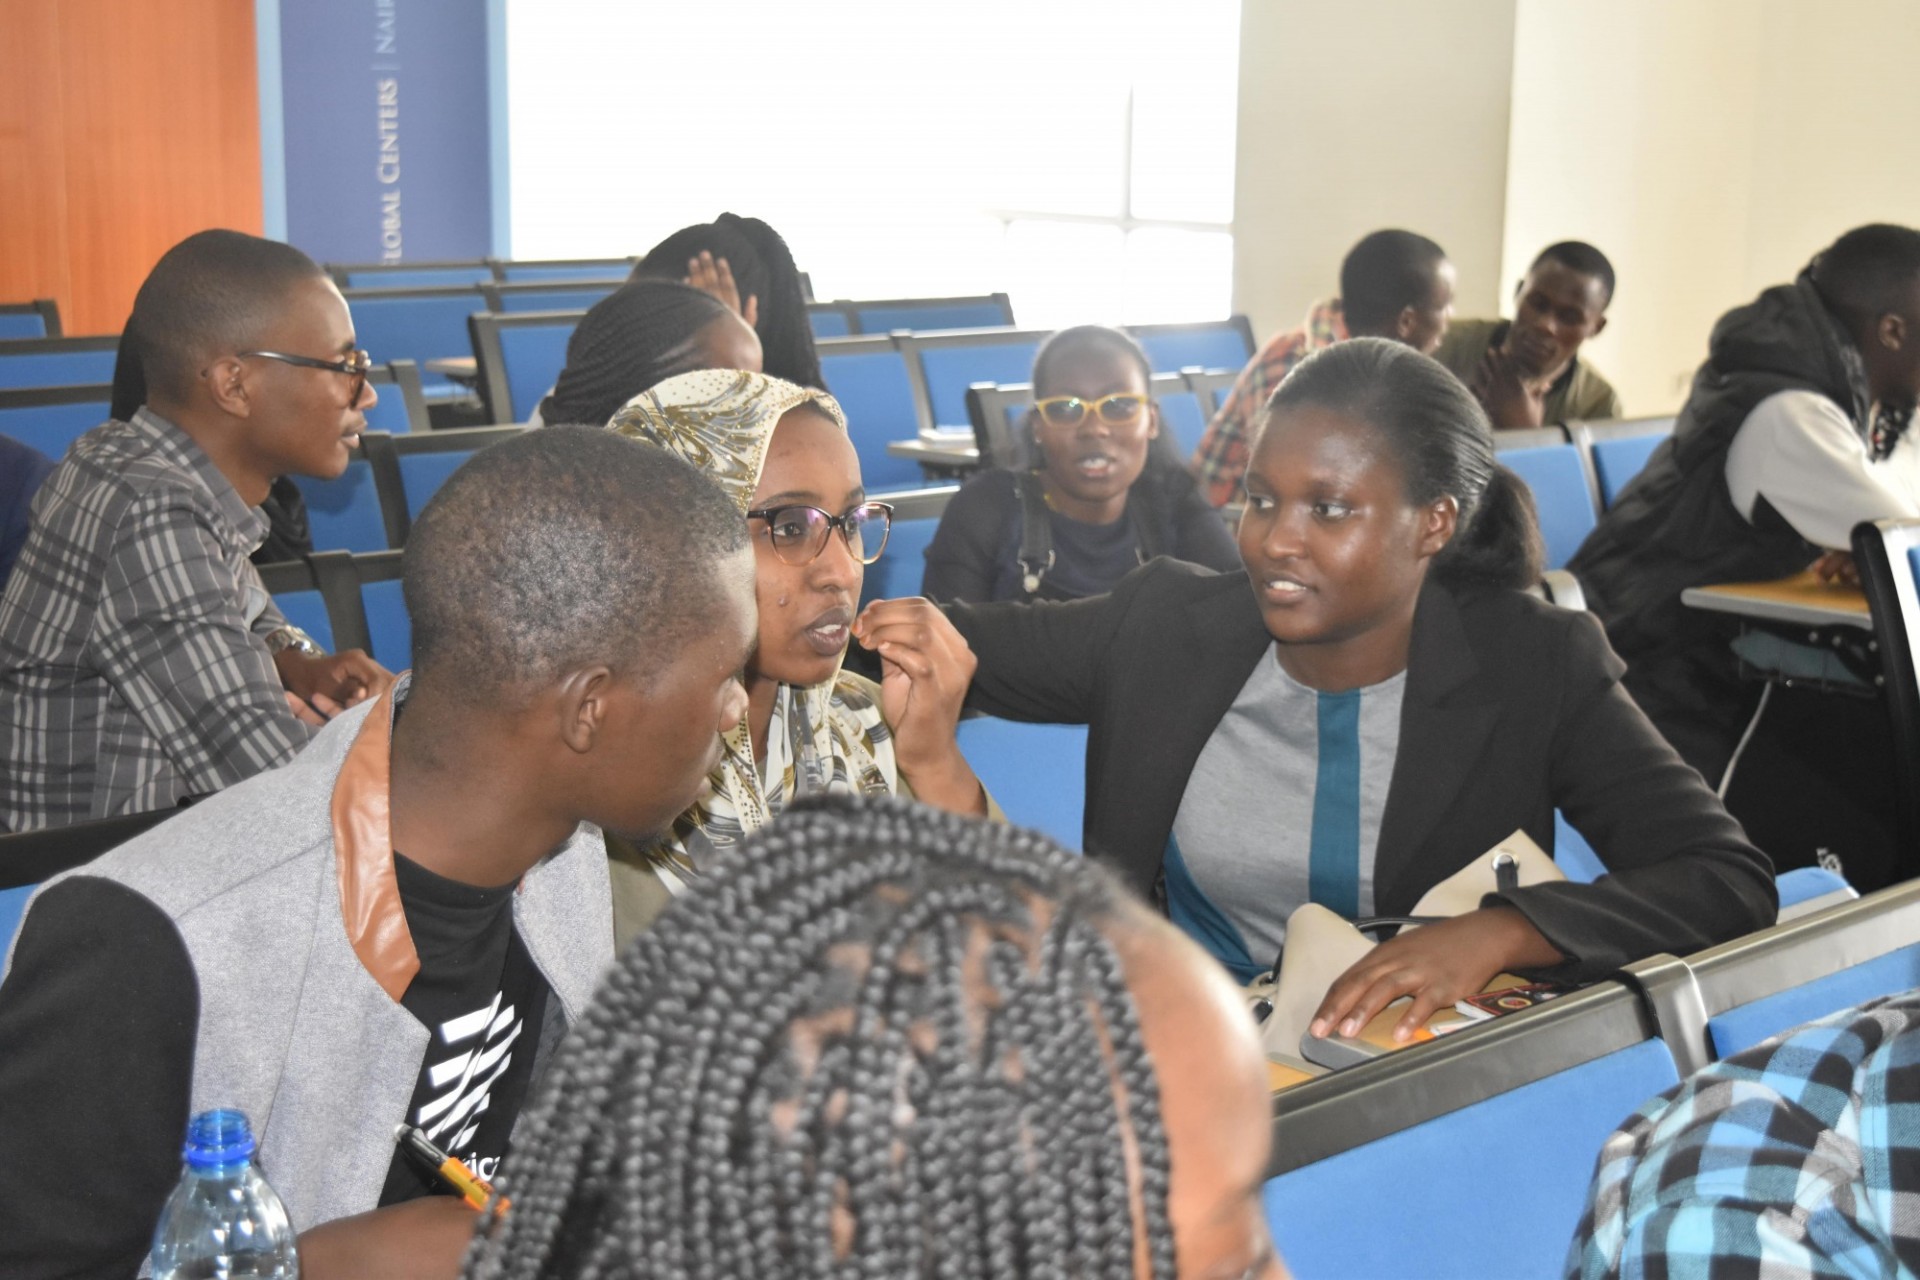 Kenyan youth involved in discussions during the workshop